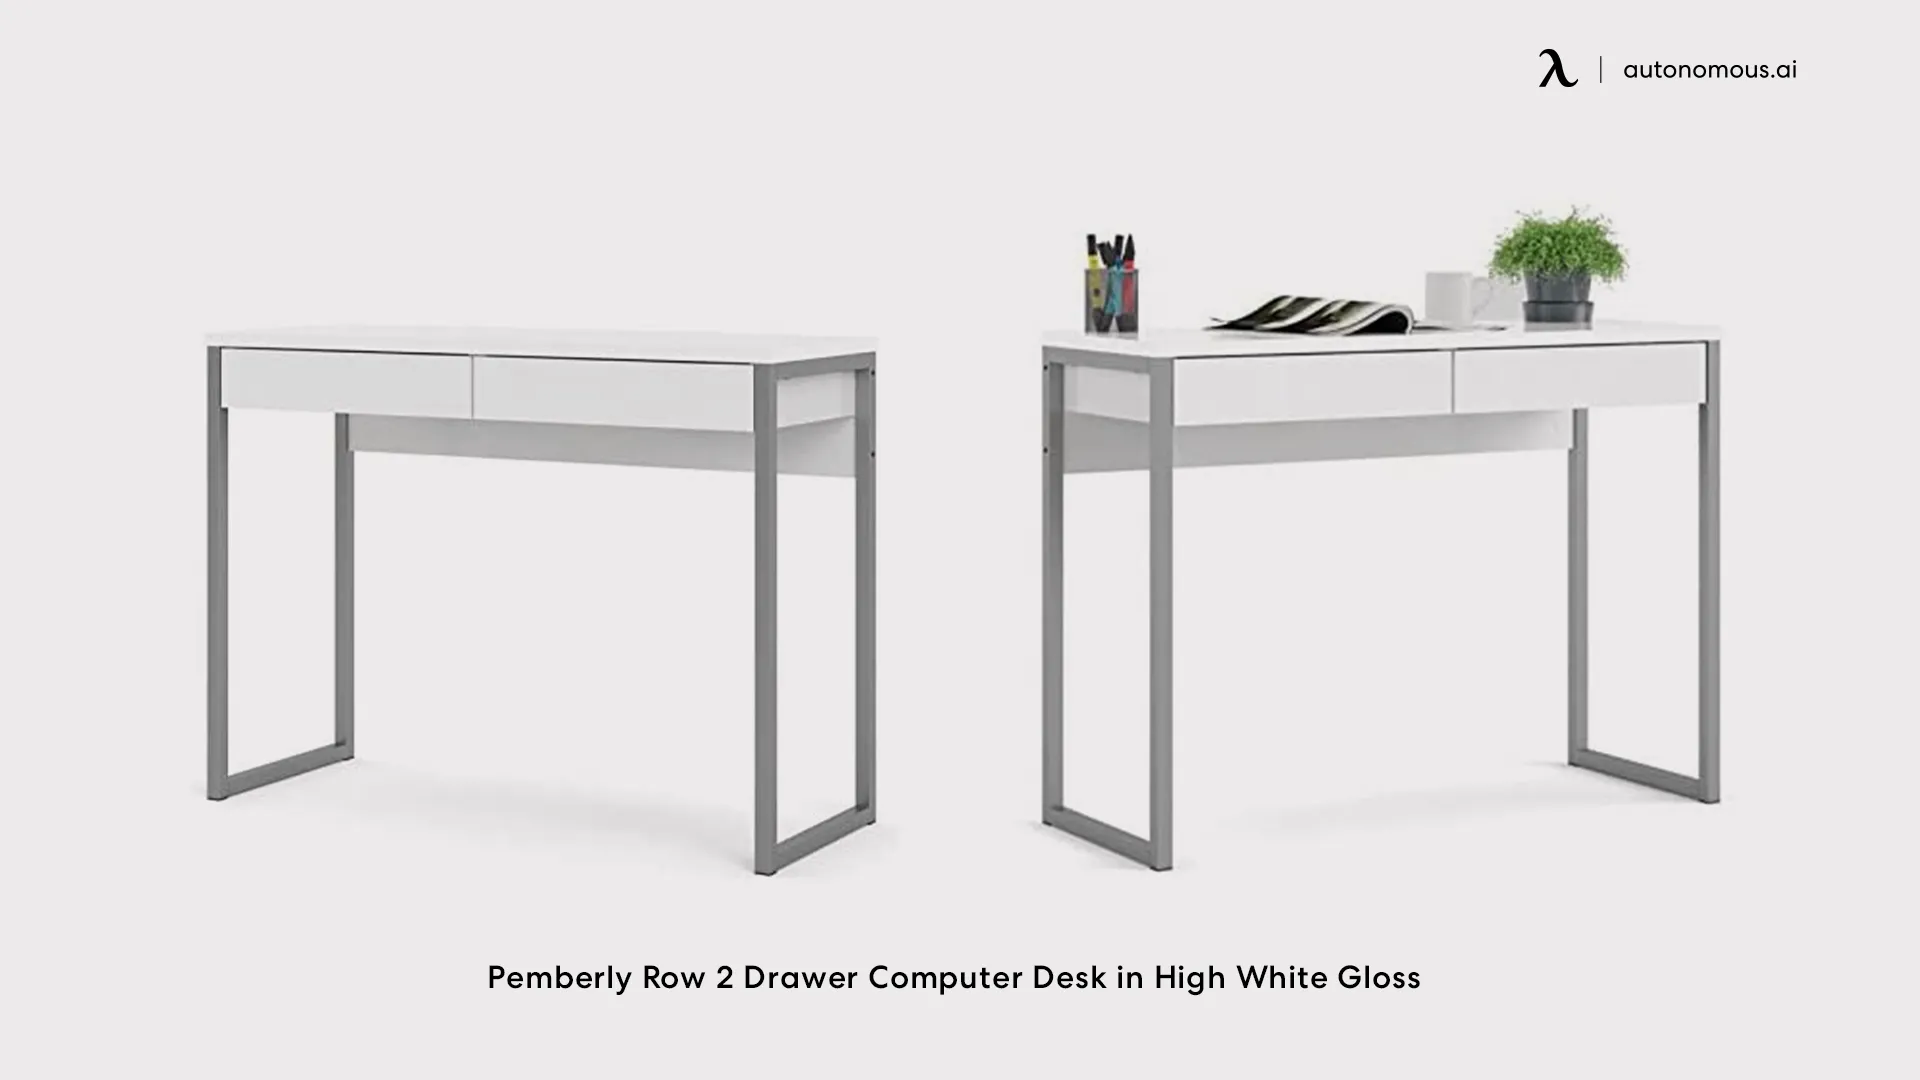 Pemberly Row 2 Drawer Computer Desk in High White Gloss